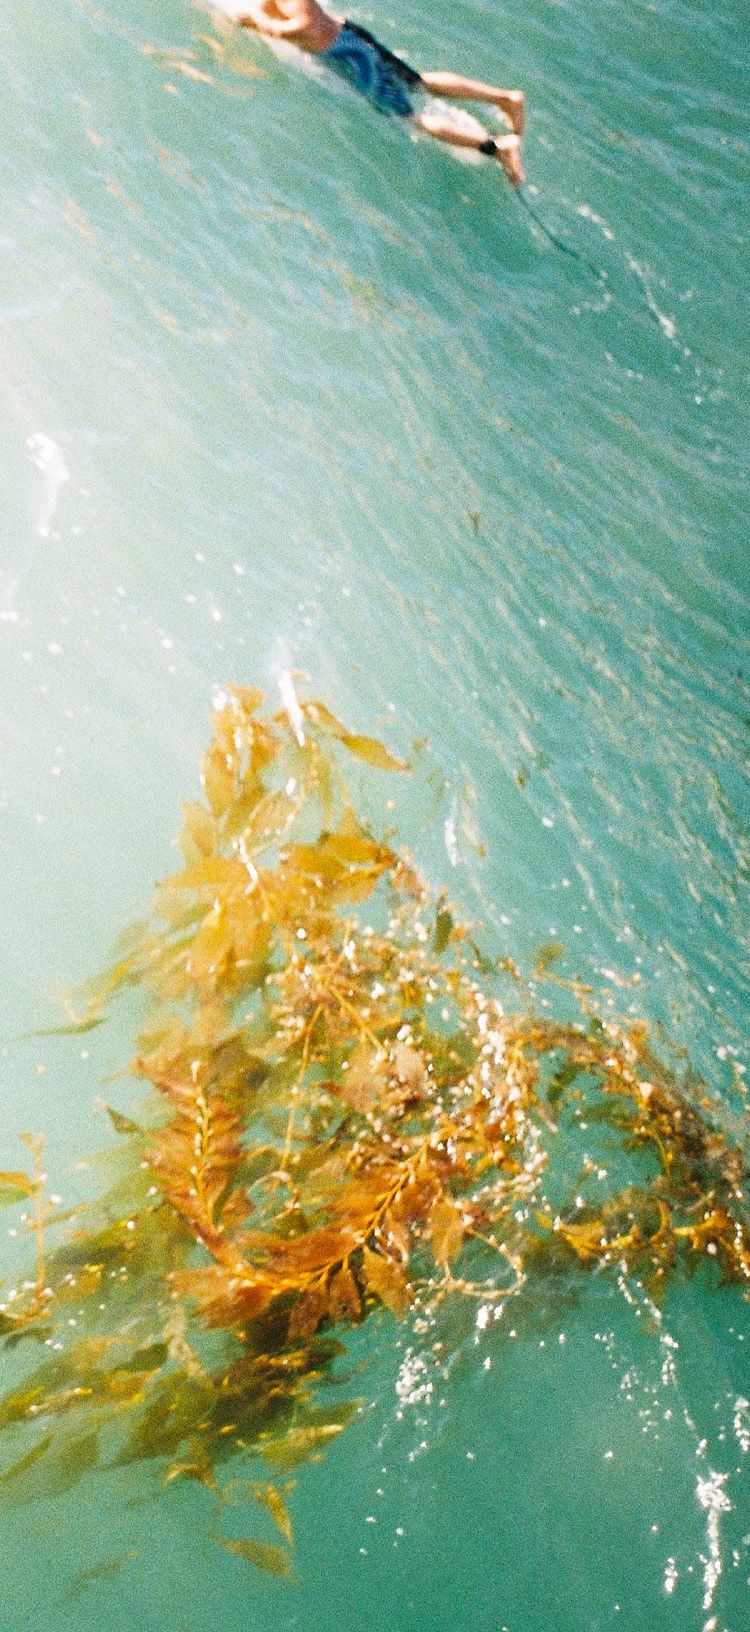 How Planting Giant Kelp Forests Can Help Save the Planet